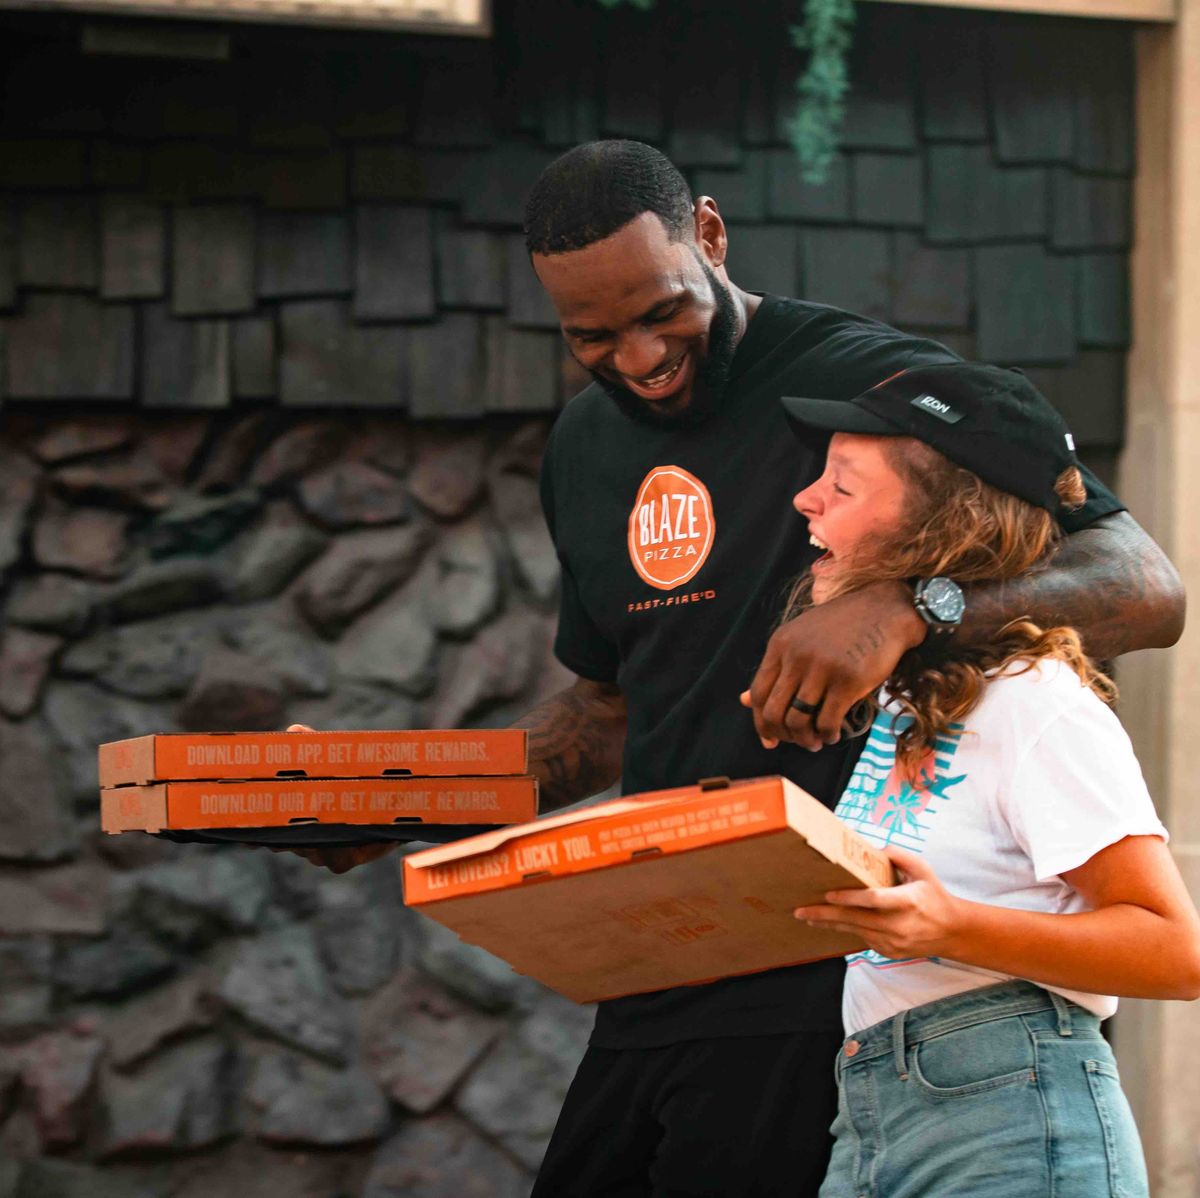 In order to act like a delivery guy, LeBron James hands out pizza on the street. 'No, my name is Ron, I have no idea who LeBron is.'